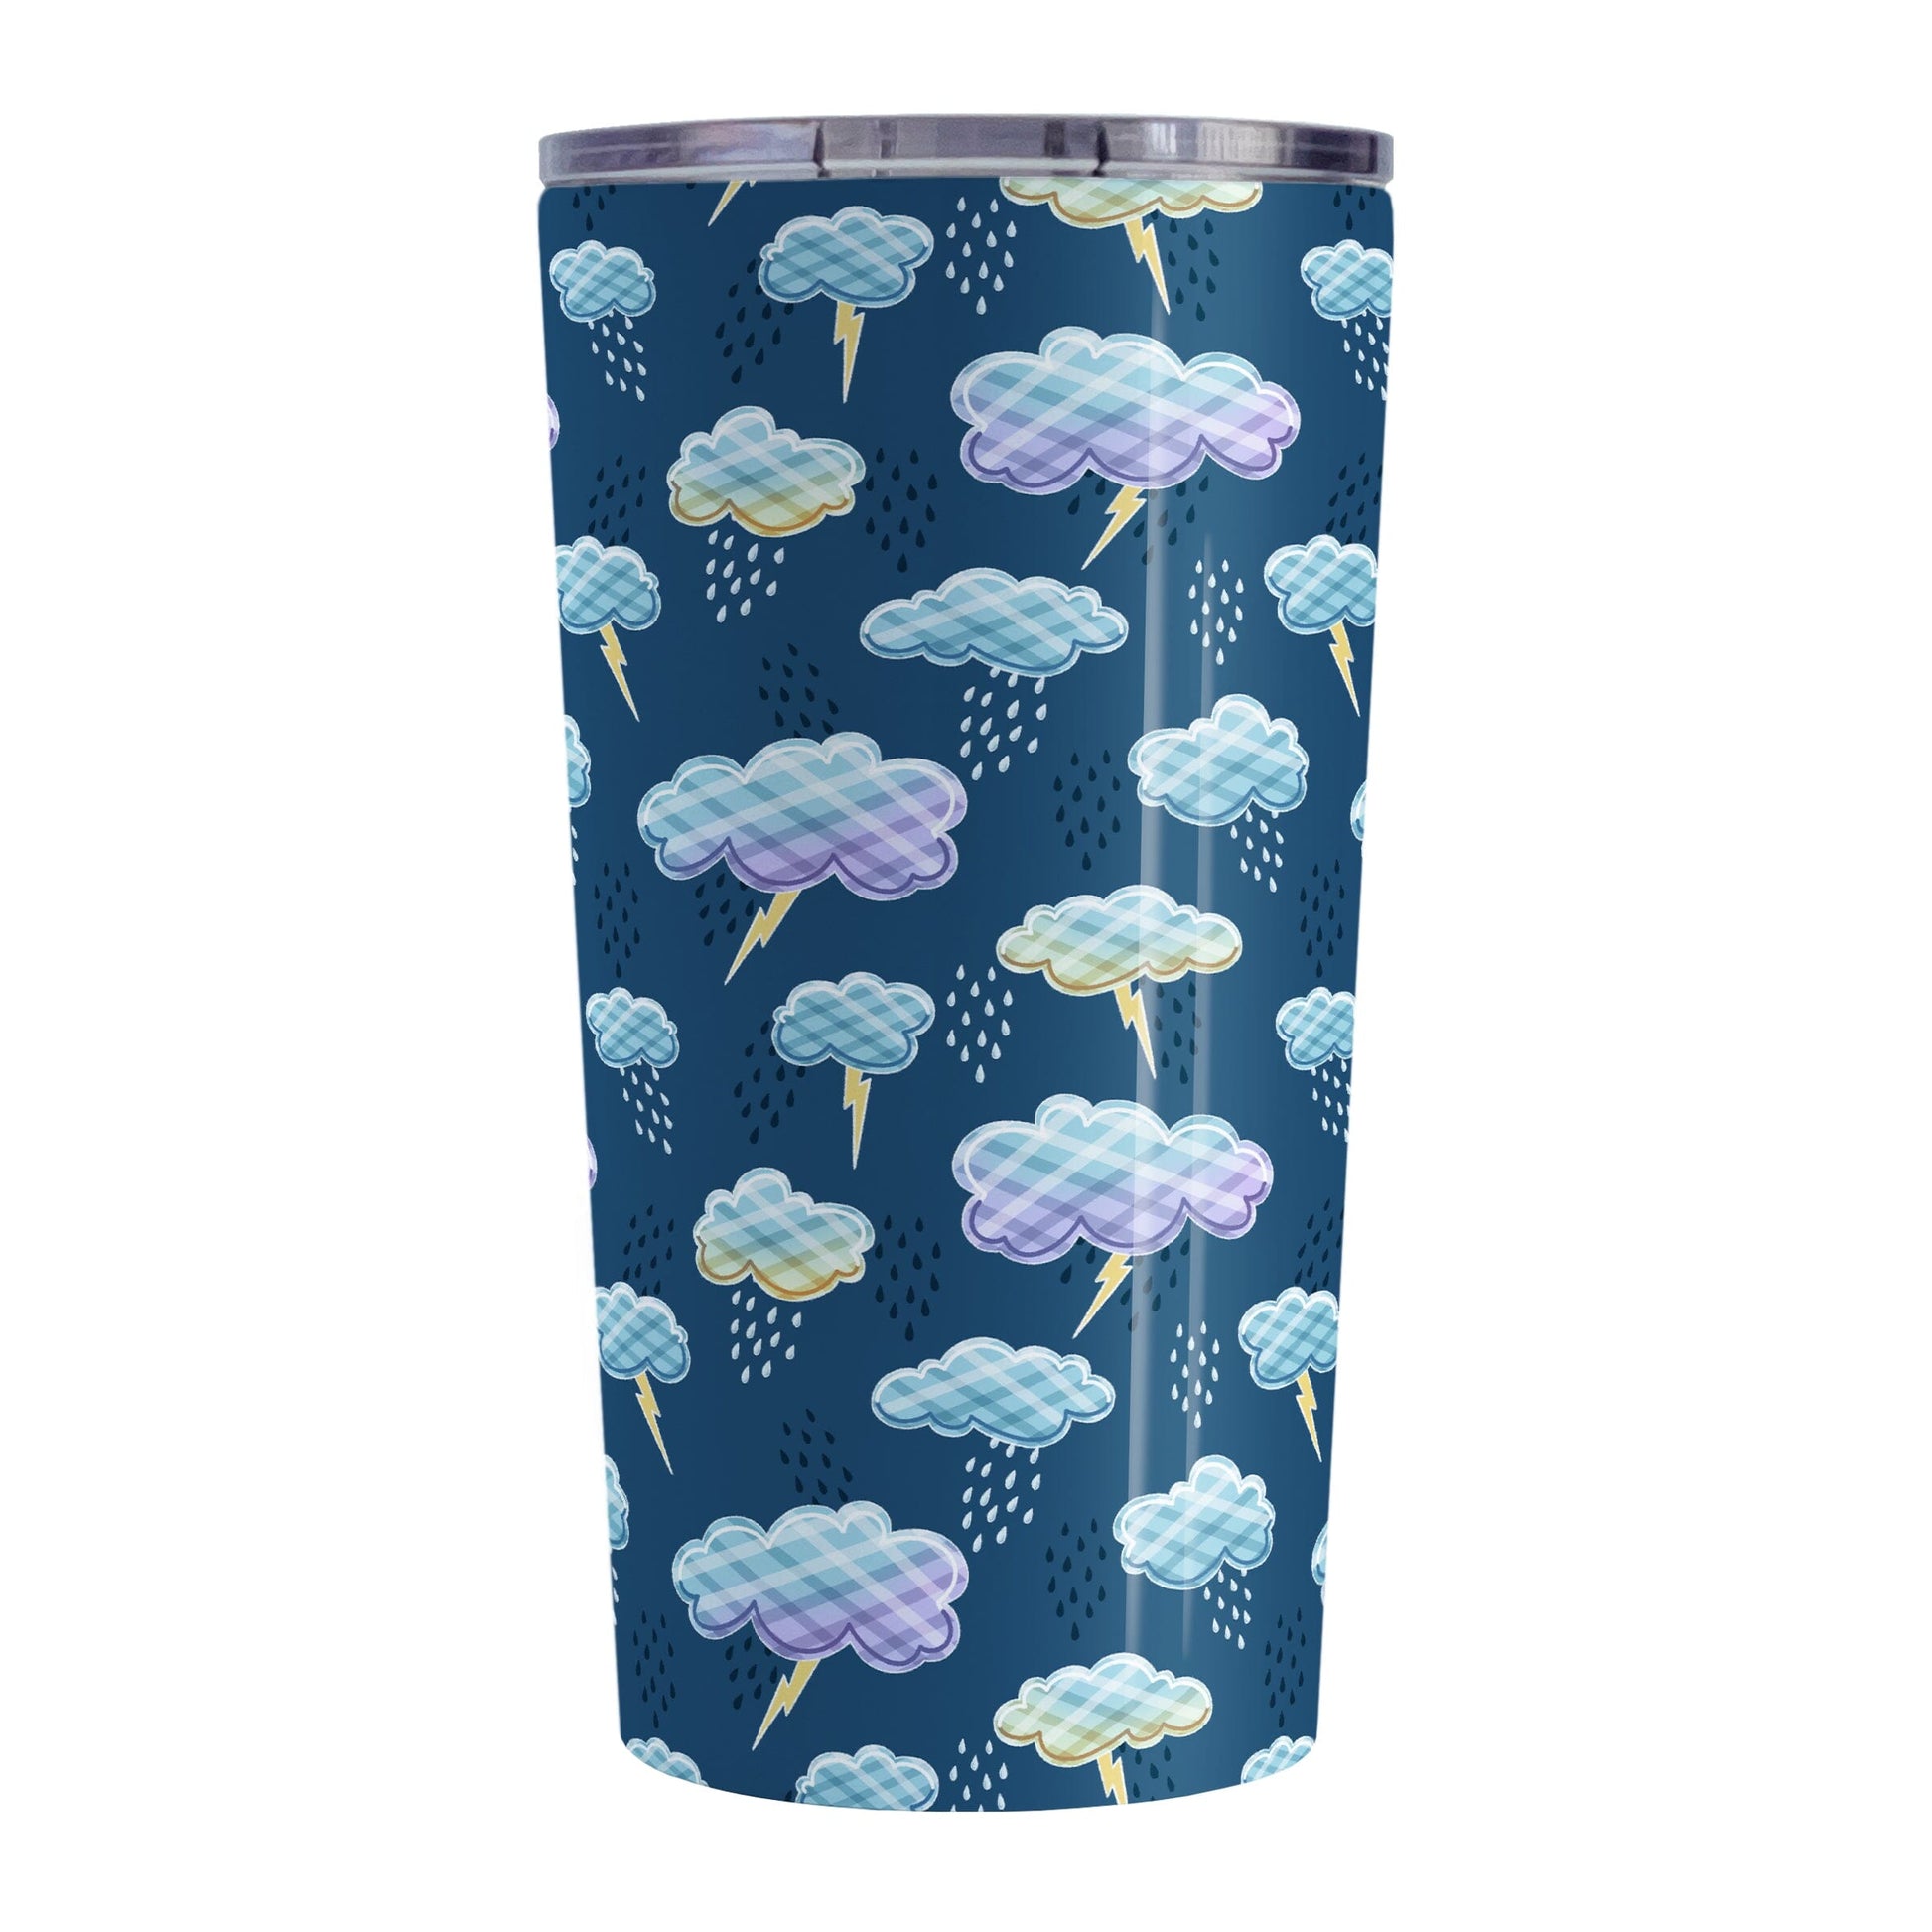 My Thunderstorm Tumbler Cup (20oz) at Amy's Coffee Mugs. A stainless steel tumbler cup designed with an adorable thunderstorm pattern with cute illustrated storm clouds with a plaid-like pattern, lightning bolts, and rain over a dark blue background.